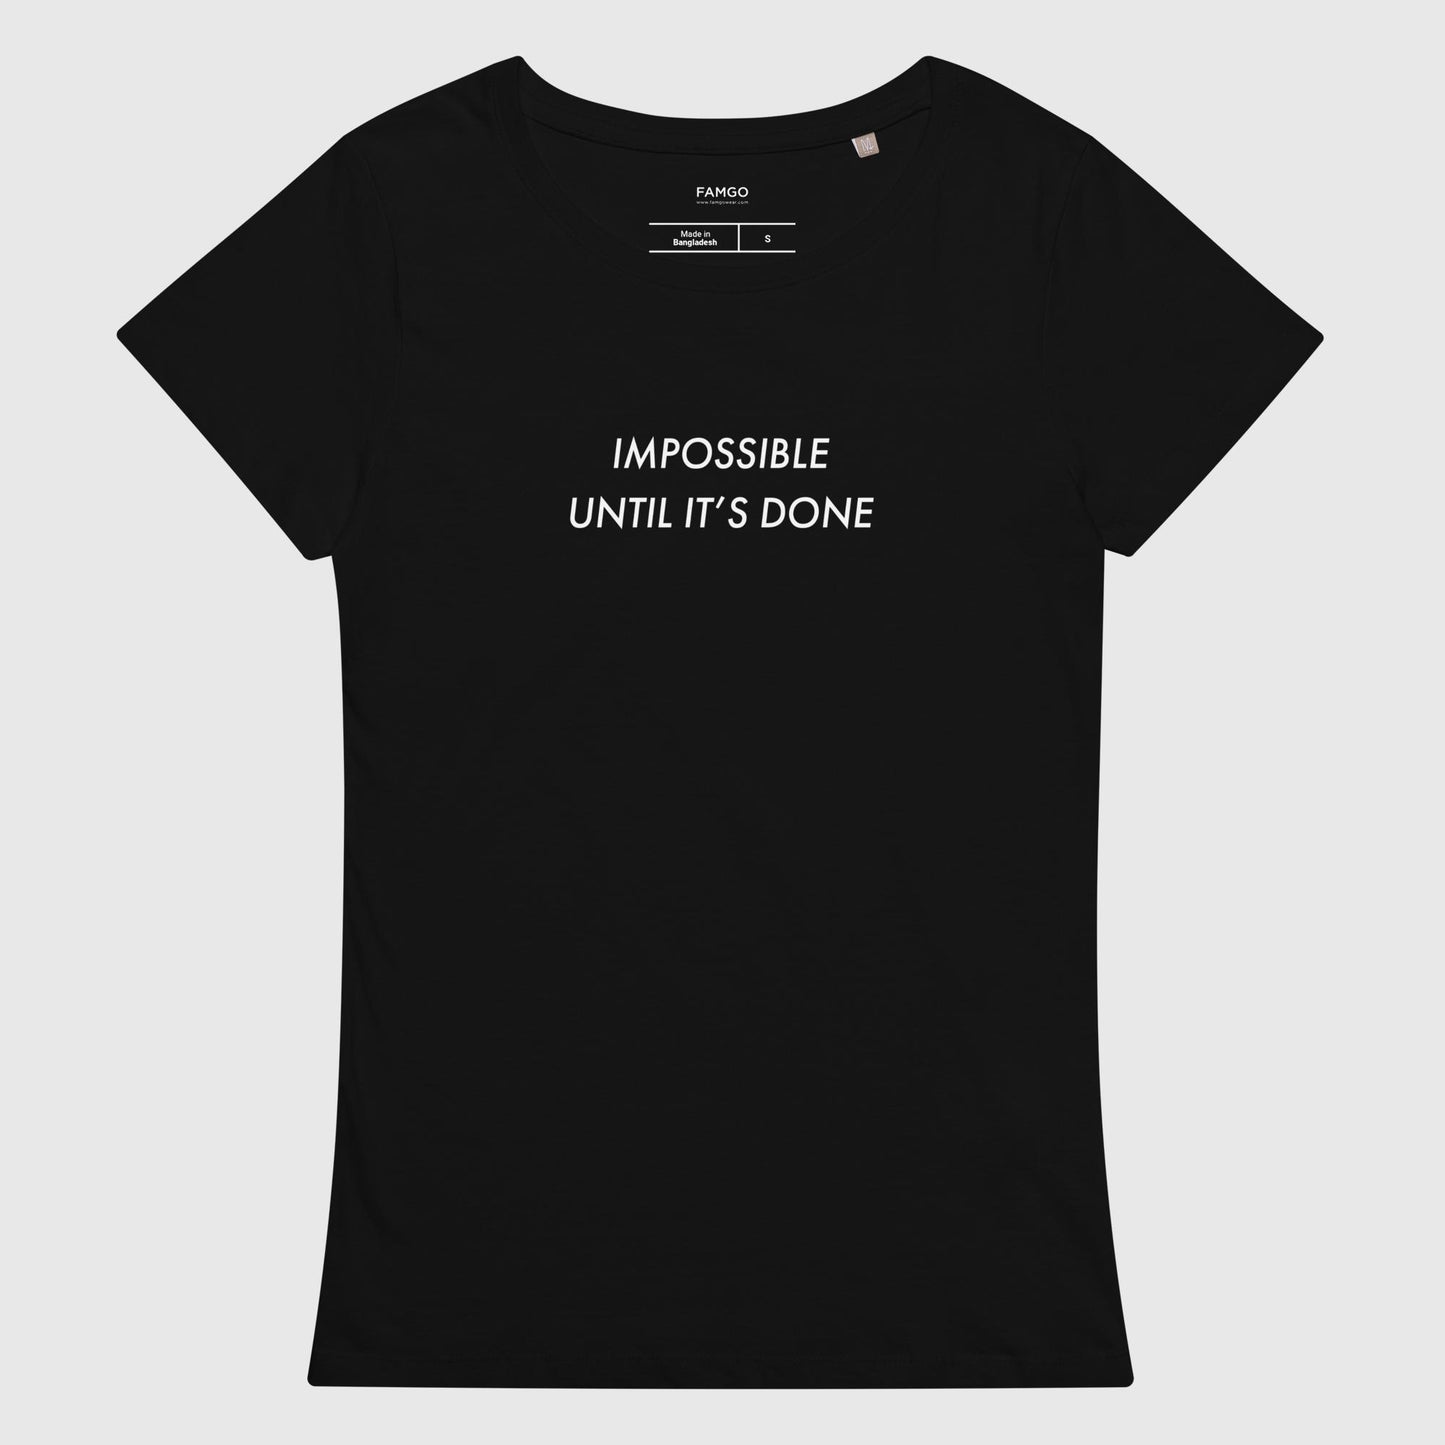 Women's black organic cotton t-shirt that features, "Impossible Until It's Done," inspired by Nelson Mandela's inspirational quote, "It always seems impossible until it's done."